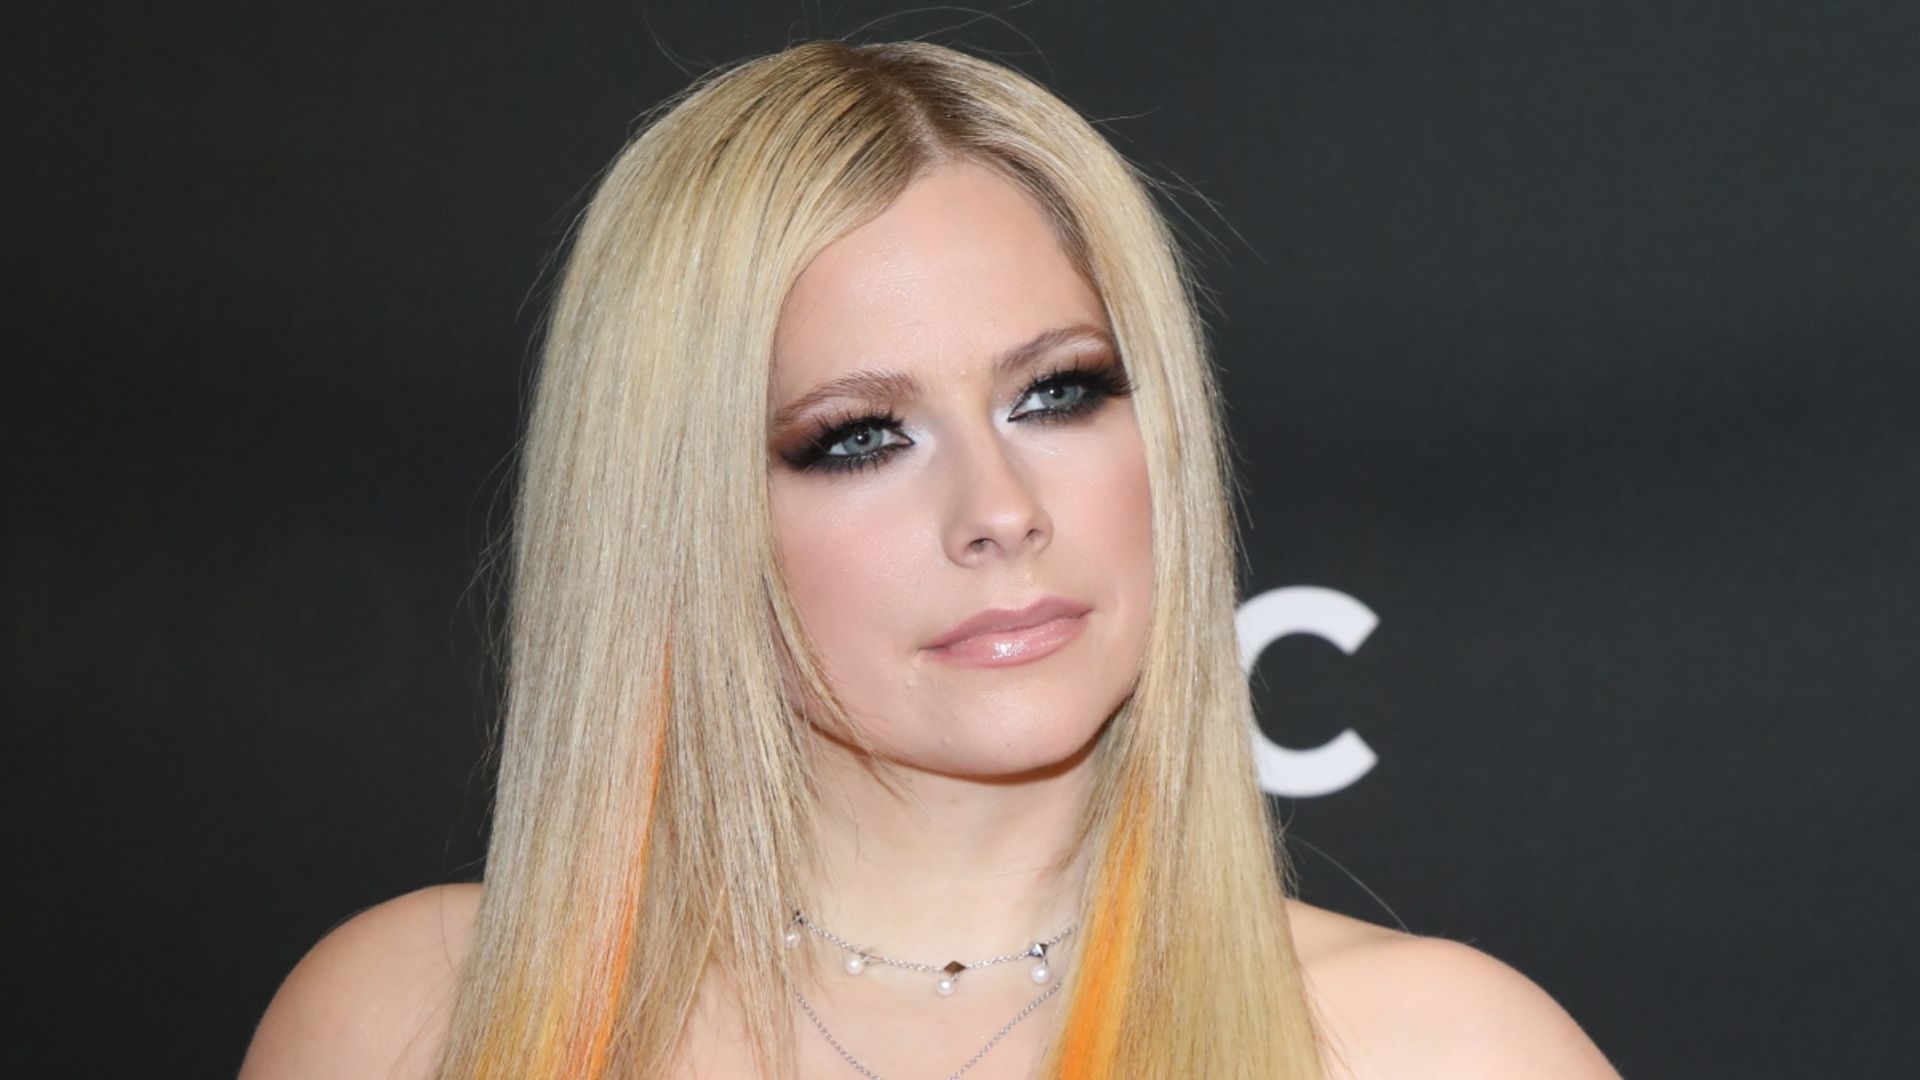 Avril Lavigne goes bold in black leather gown for Juno Awards red carpet